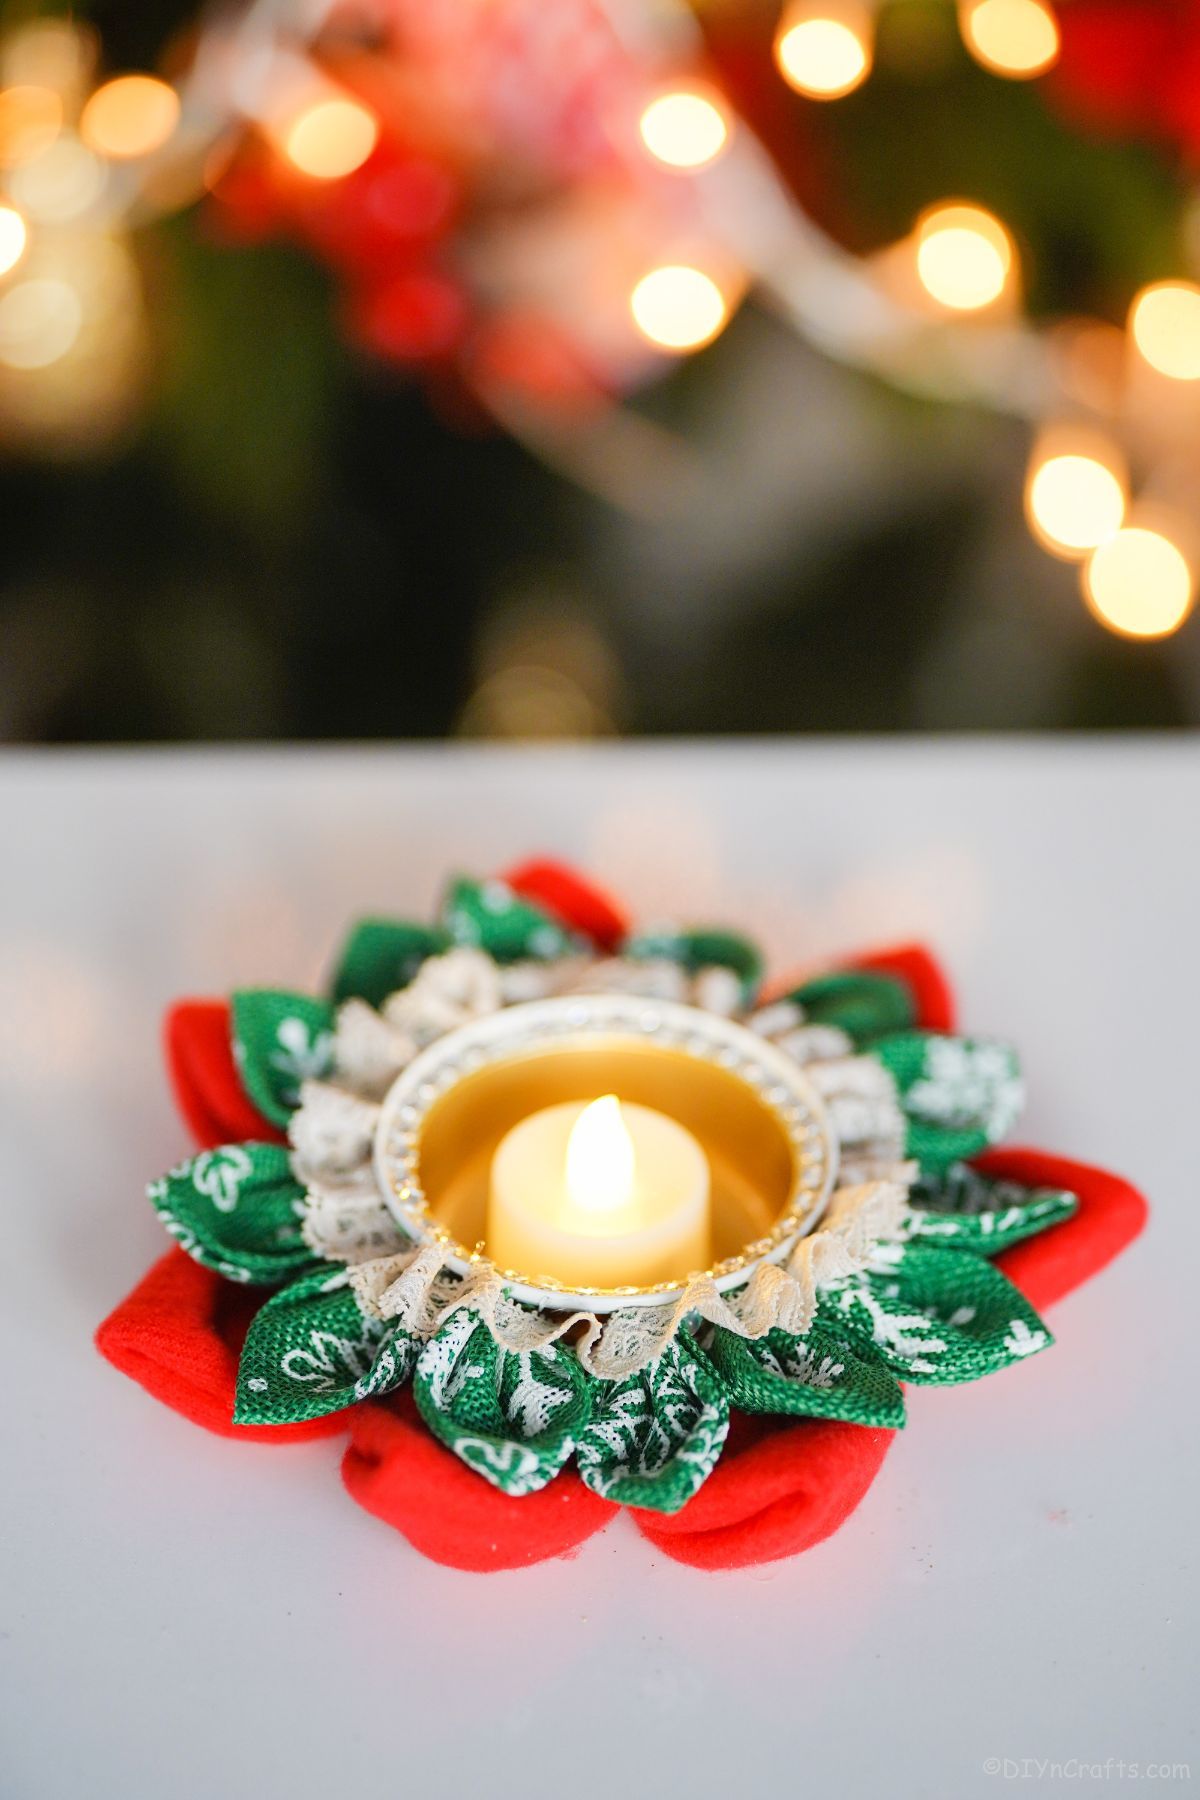 christmas candle holder on table by Christmas tree